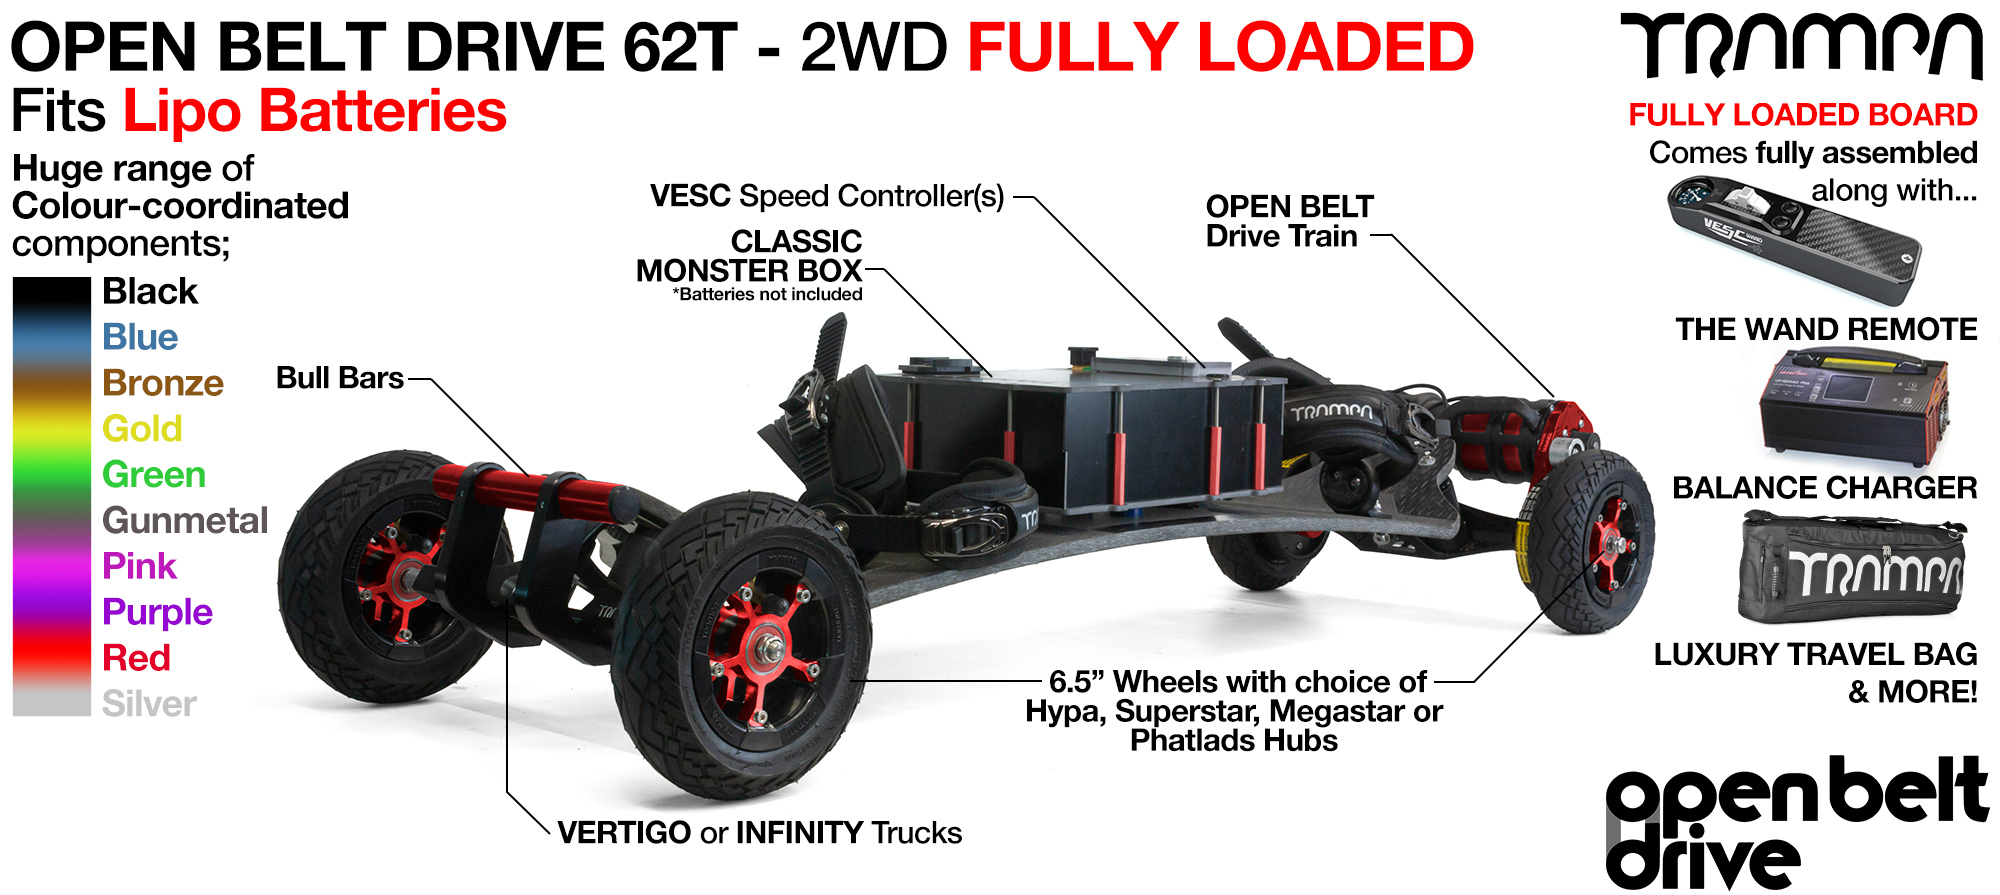 2WD 66T Open Belt Drive TRAMPA Electric Mountainboard with 6 Inch URBAN TREADs Wheels & 62 Tooth Pulleys - FULLY LOADED DOUBLE STACK Li-Po